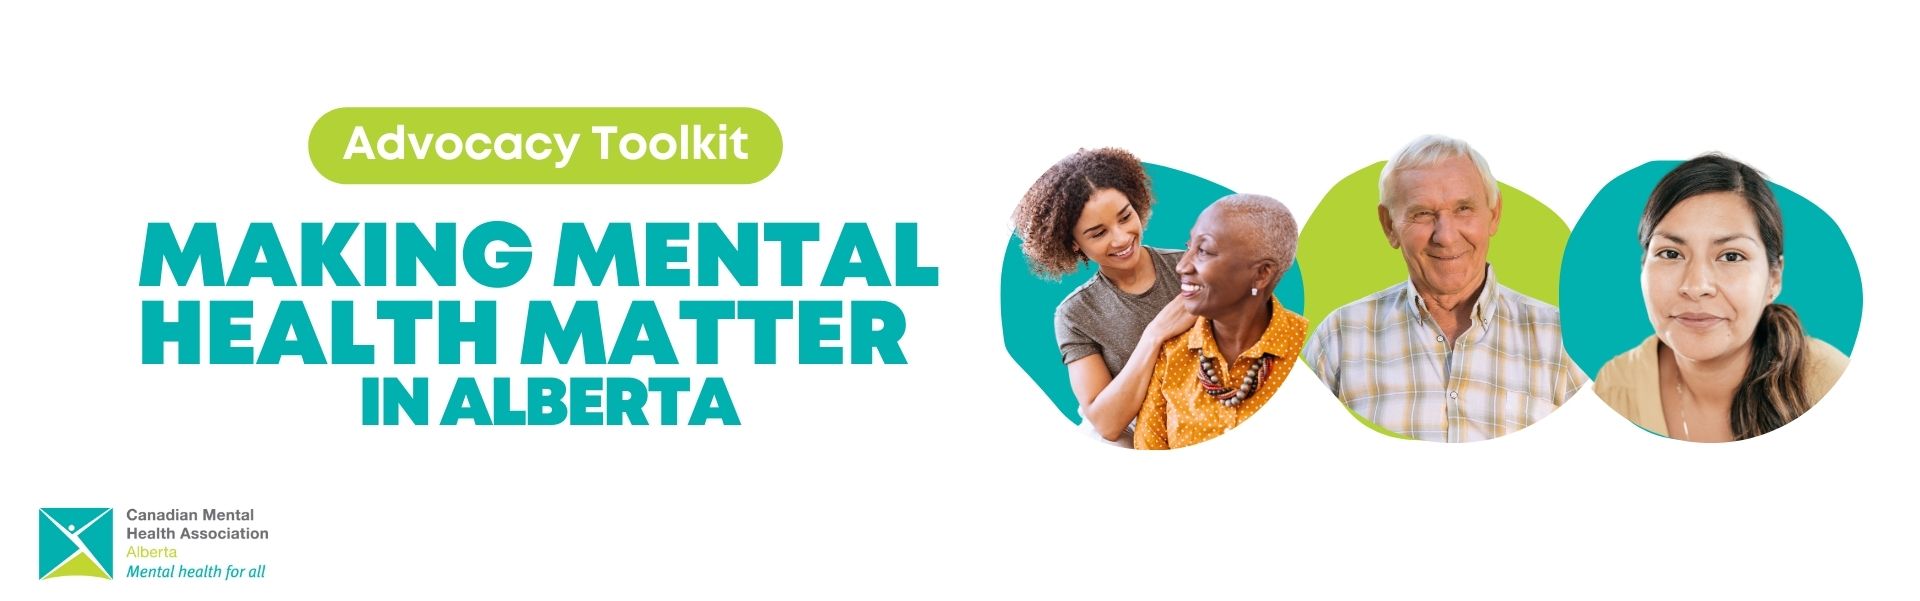 Making Mental Health Matter Advocacy Toolkit